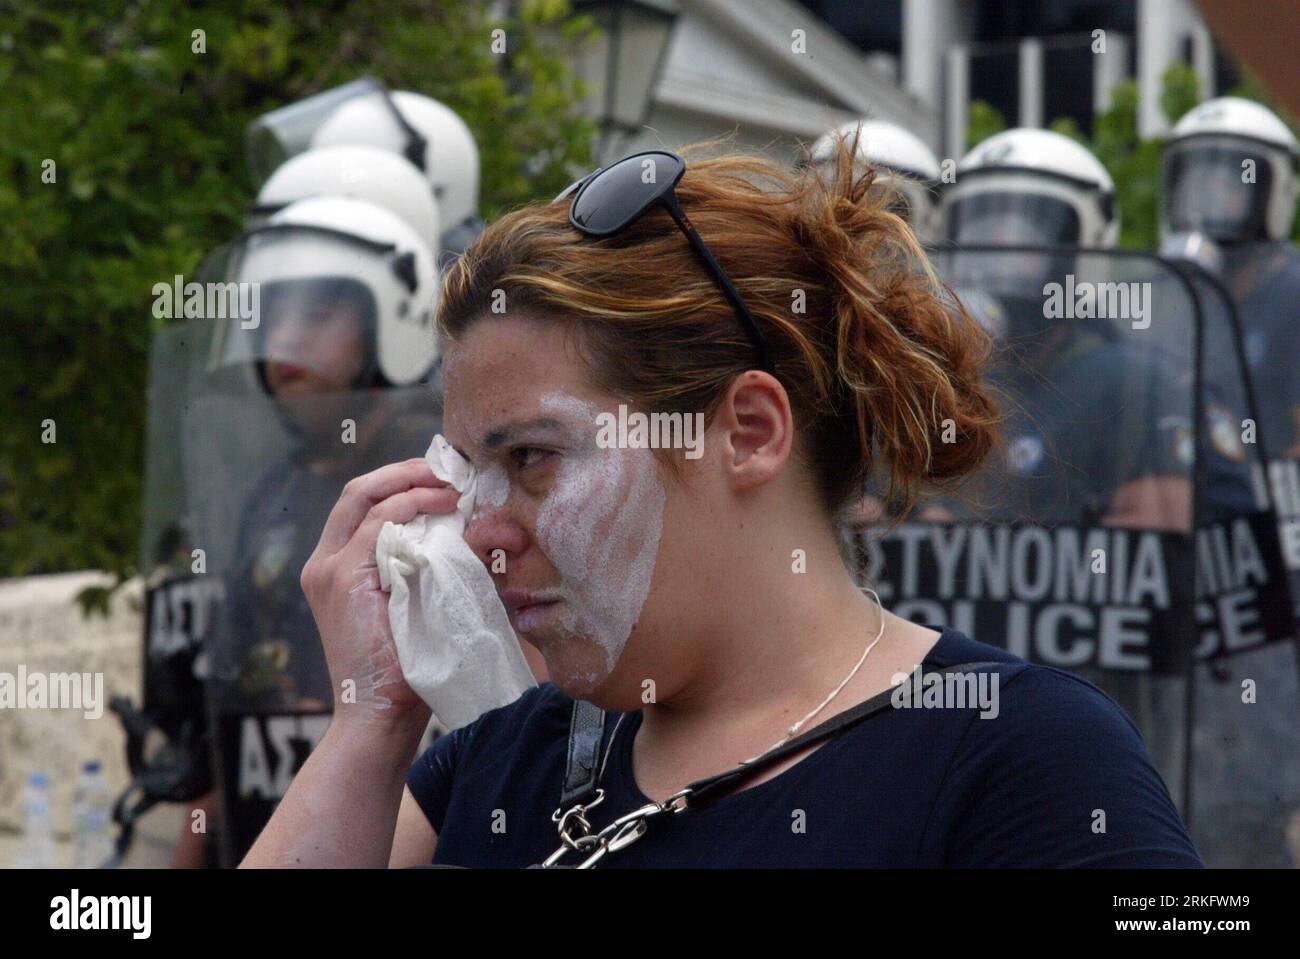 Bildnummer: 55460675  Datum: 15.06.2011  Copyright: imago/Xinhua (110615) -- ATHENS, June 15, 2011 (Xinhua) -- A demonstrator wipes her tears after anti-riot policemen fire the tear gas at the Constitution Square in Athens, Greece, June 15, 2011. A new 24-hour nationwide general strike hit Greece Wednesday in protest at further austerity measures planned by the Greek government to counter its acute debt crisis. (Xinhua/Marios Lolos) (wjd) GREECE-AUSTERITY MEASURES-PROTEST PUBLICATIONxNOTxINxCHN Politik Proteste GRE x0x xkg 2011 quer     Bildnummer 55460675 Date 15 06 2011 Copyright Imago XINHU Stock Photo